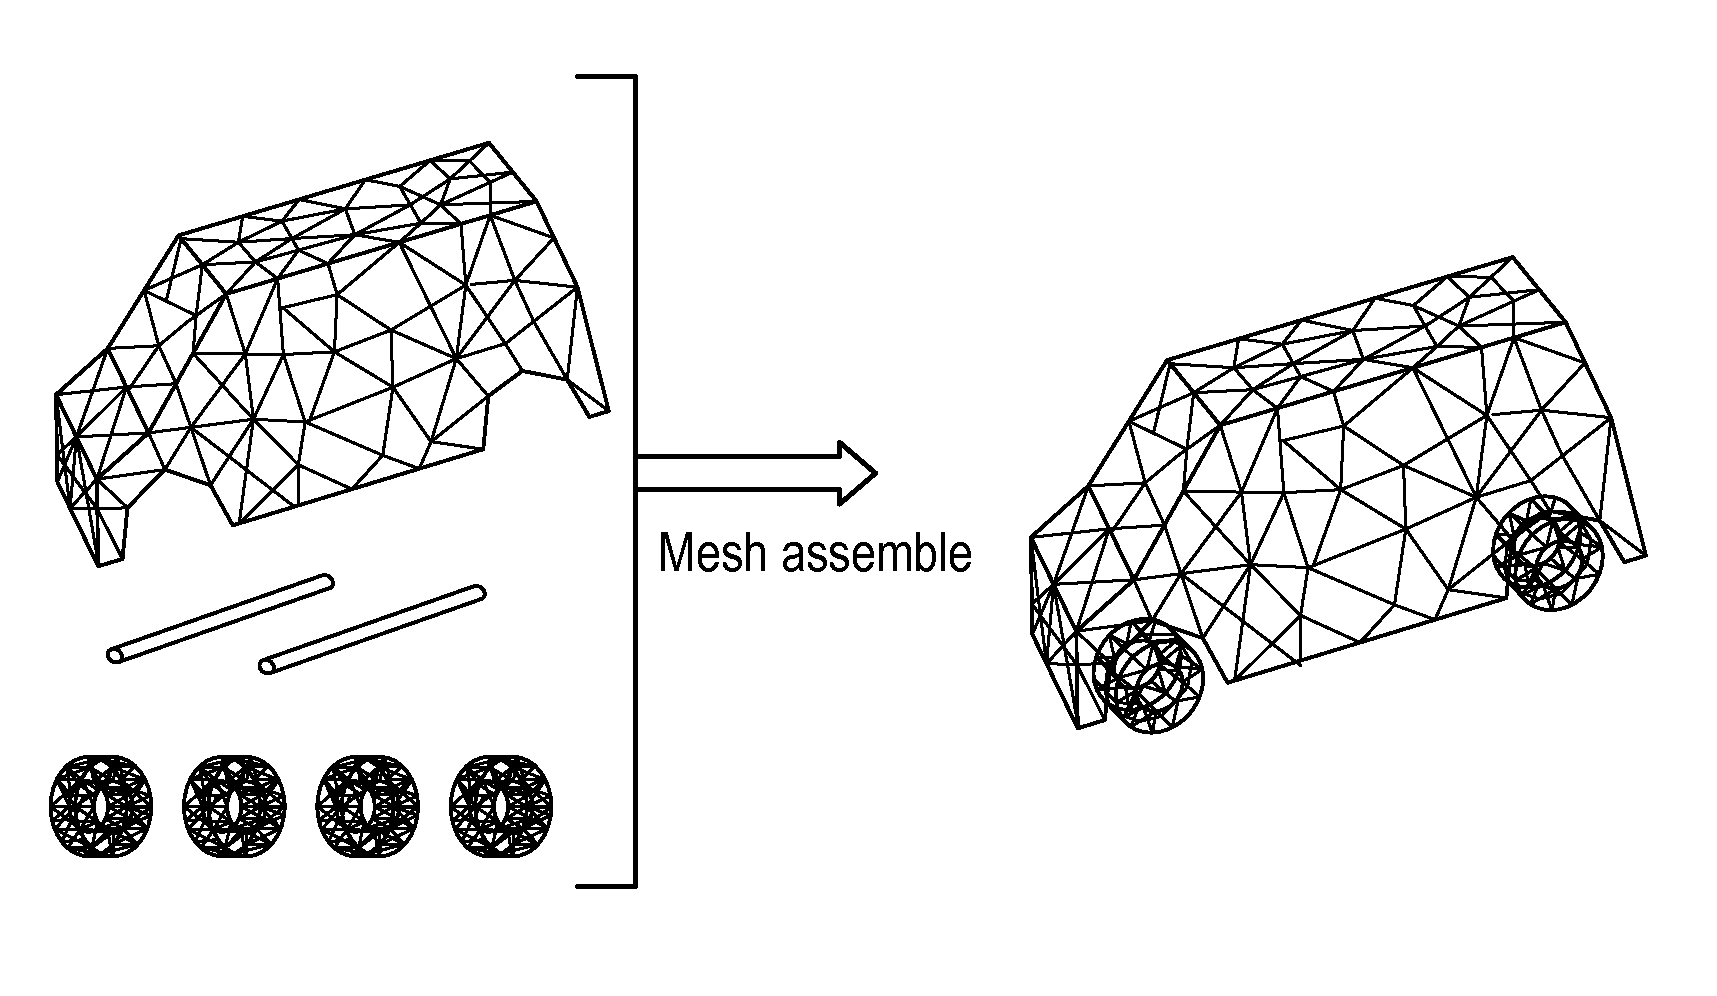 Decoupled parallel meshing in computer aided design